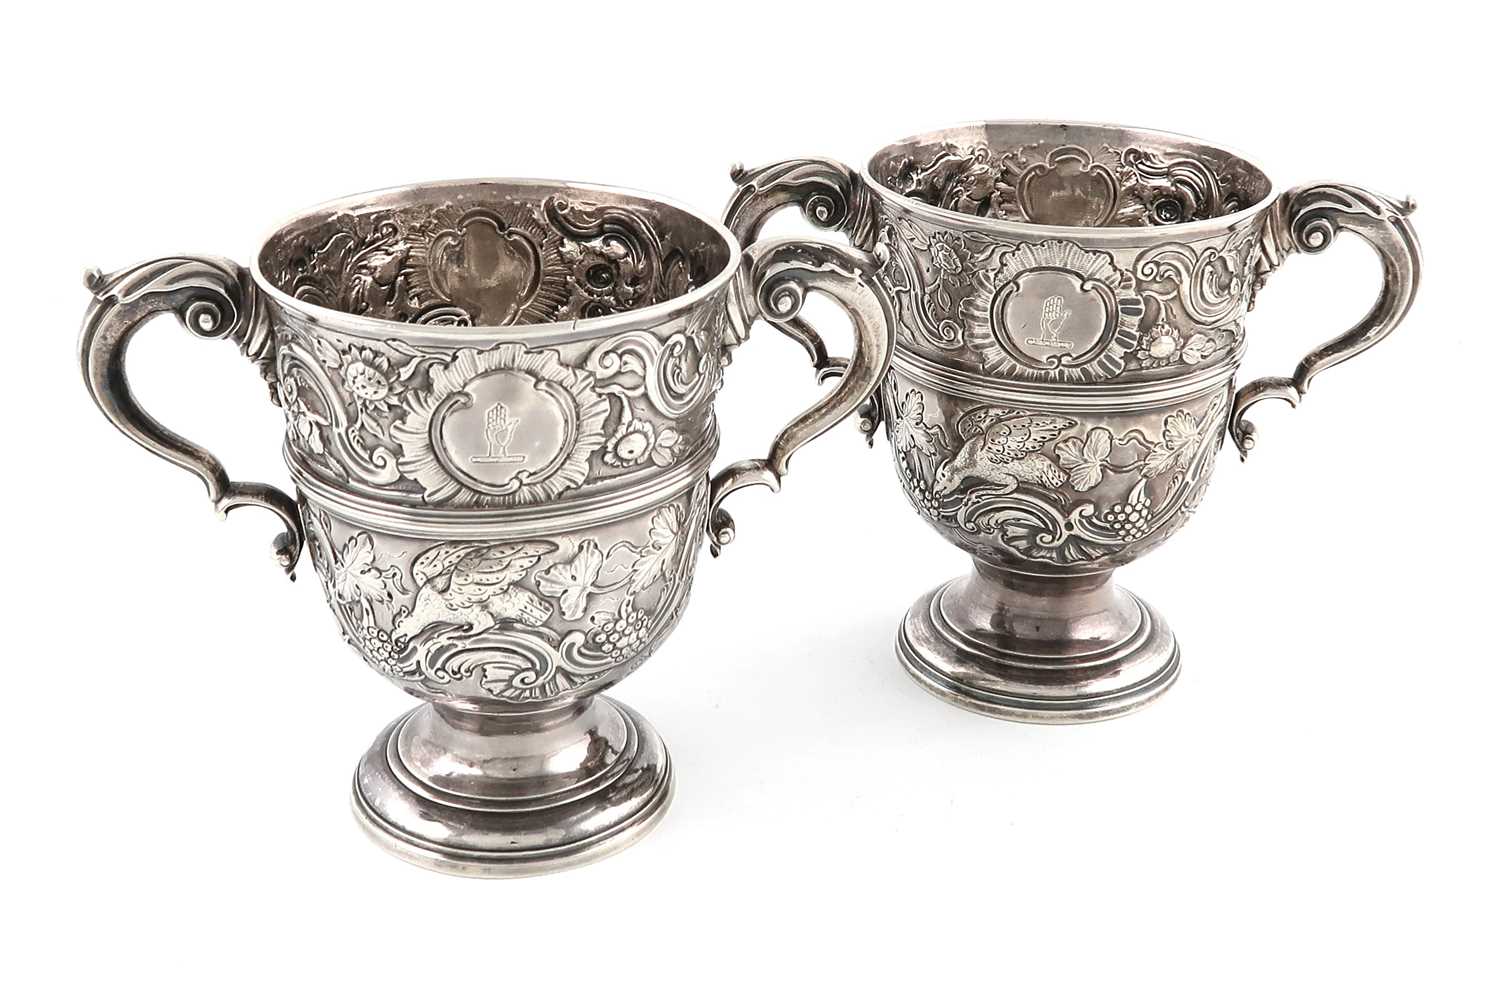 A pair of mid-18th century Irish silver two-handled cups,marks partially lost in decoration,